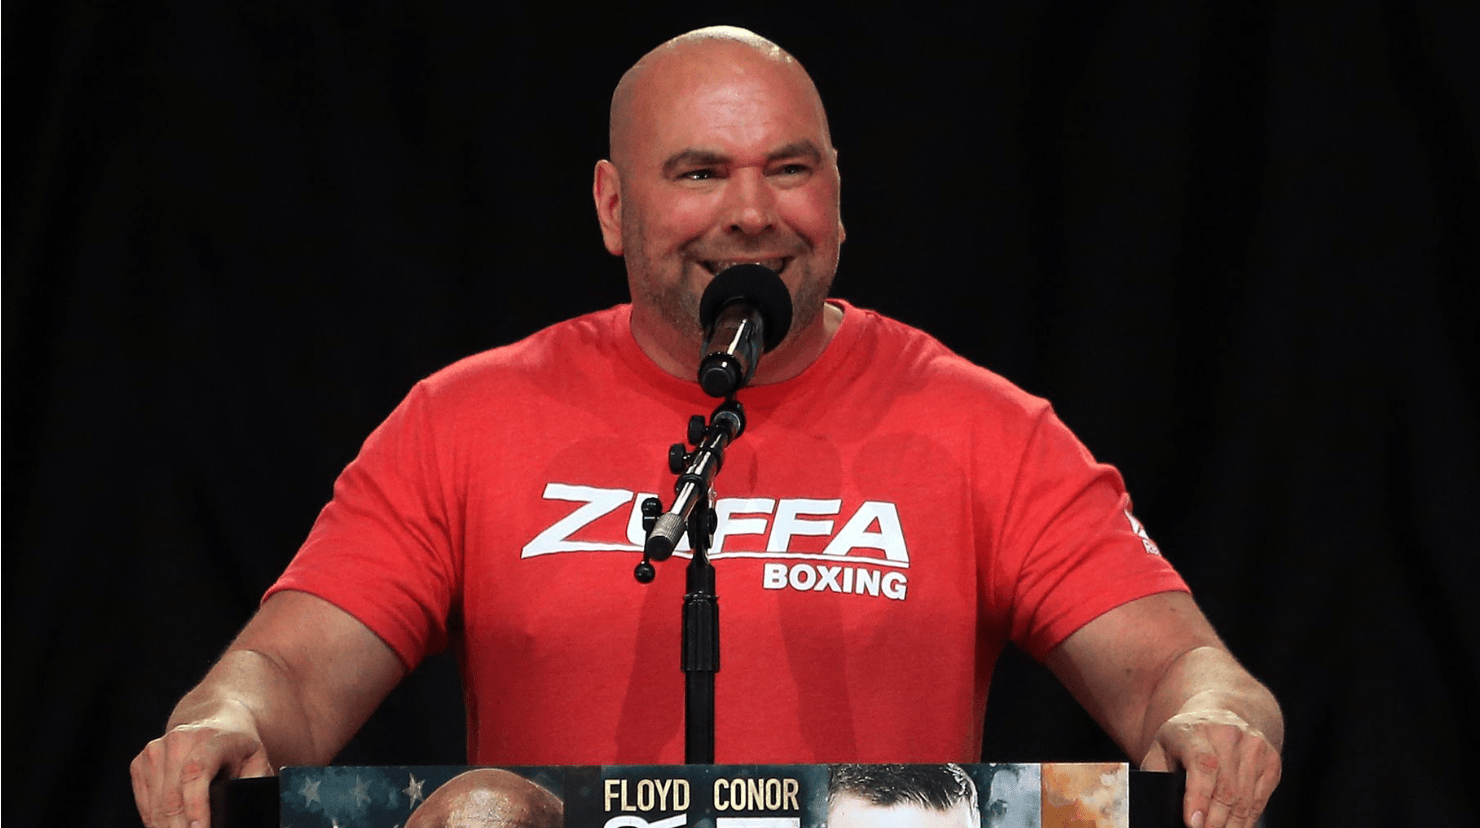 Dana White To Make Move Into World Of Boxing After The Summer